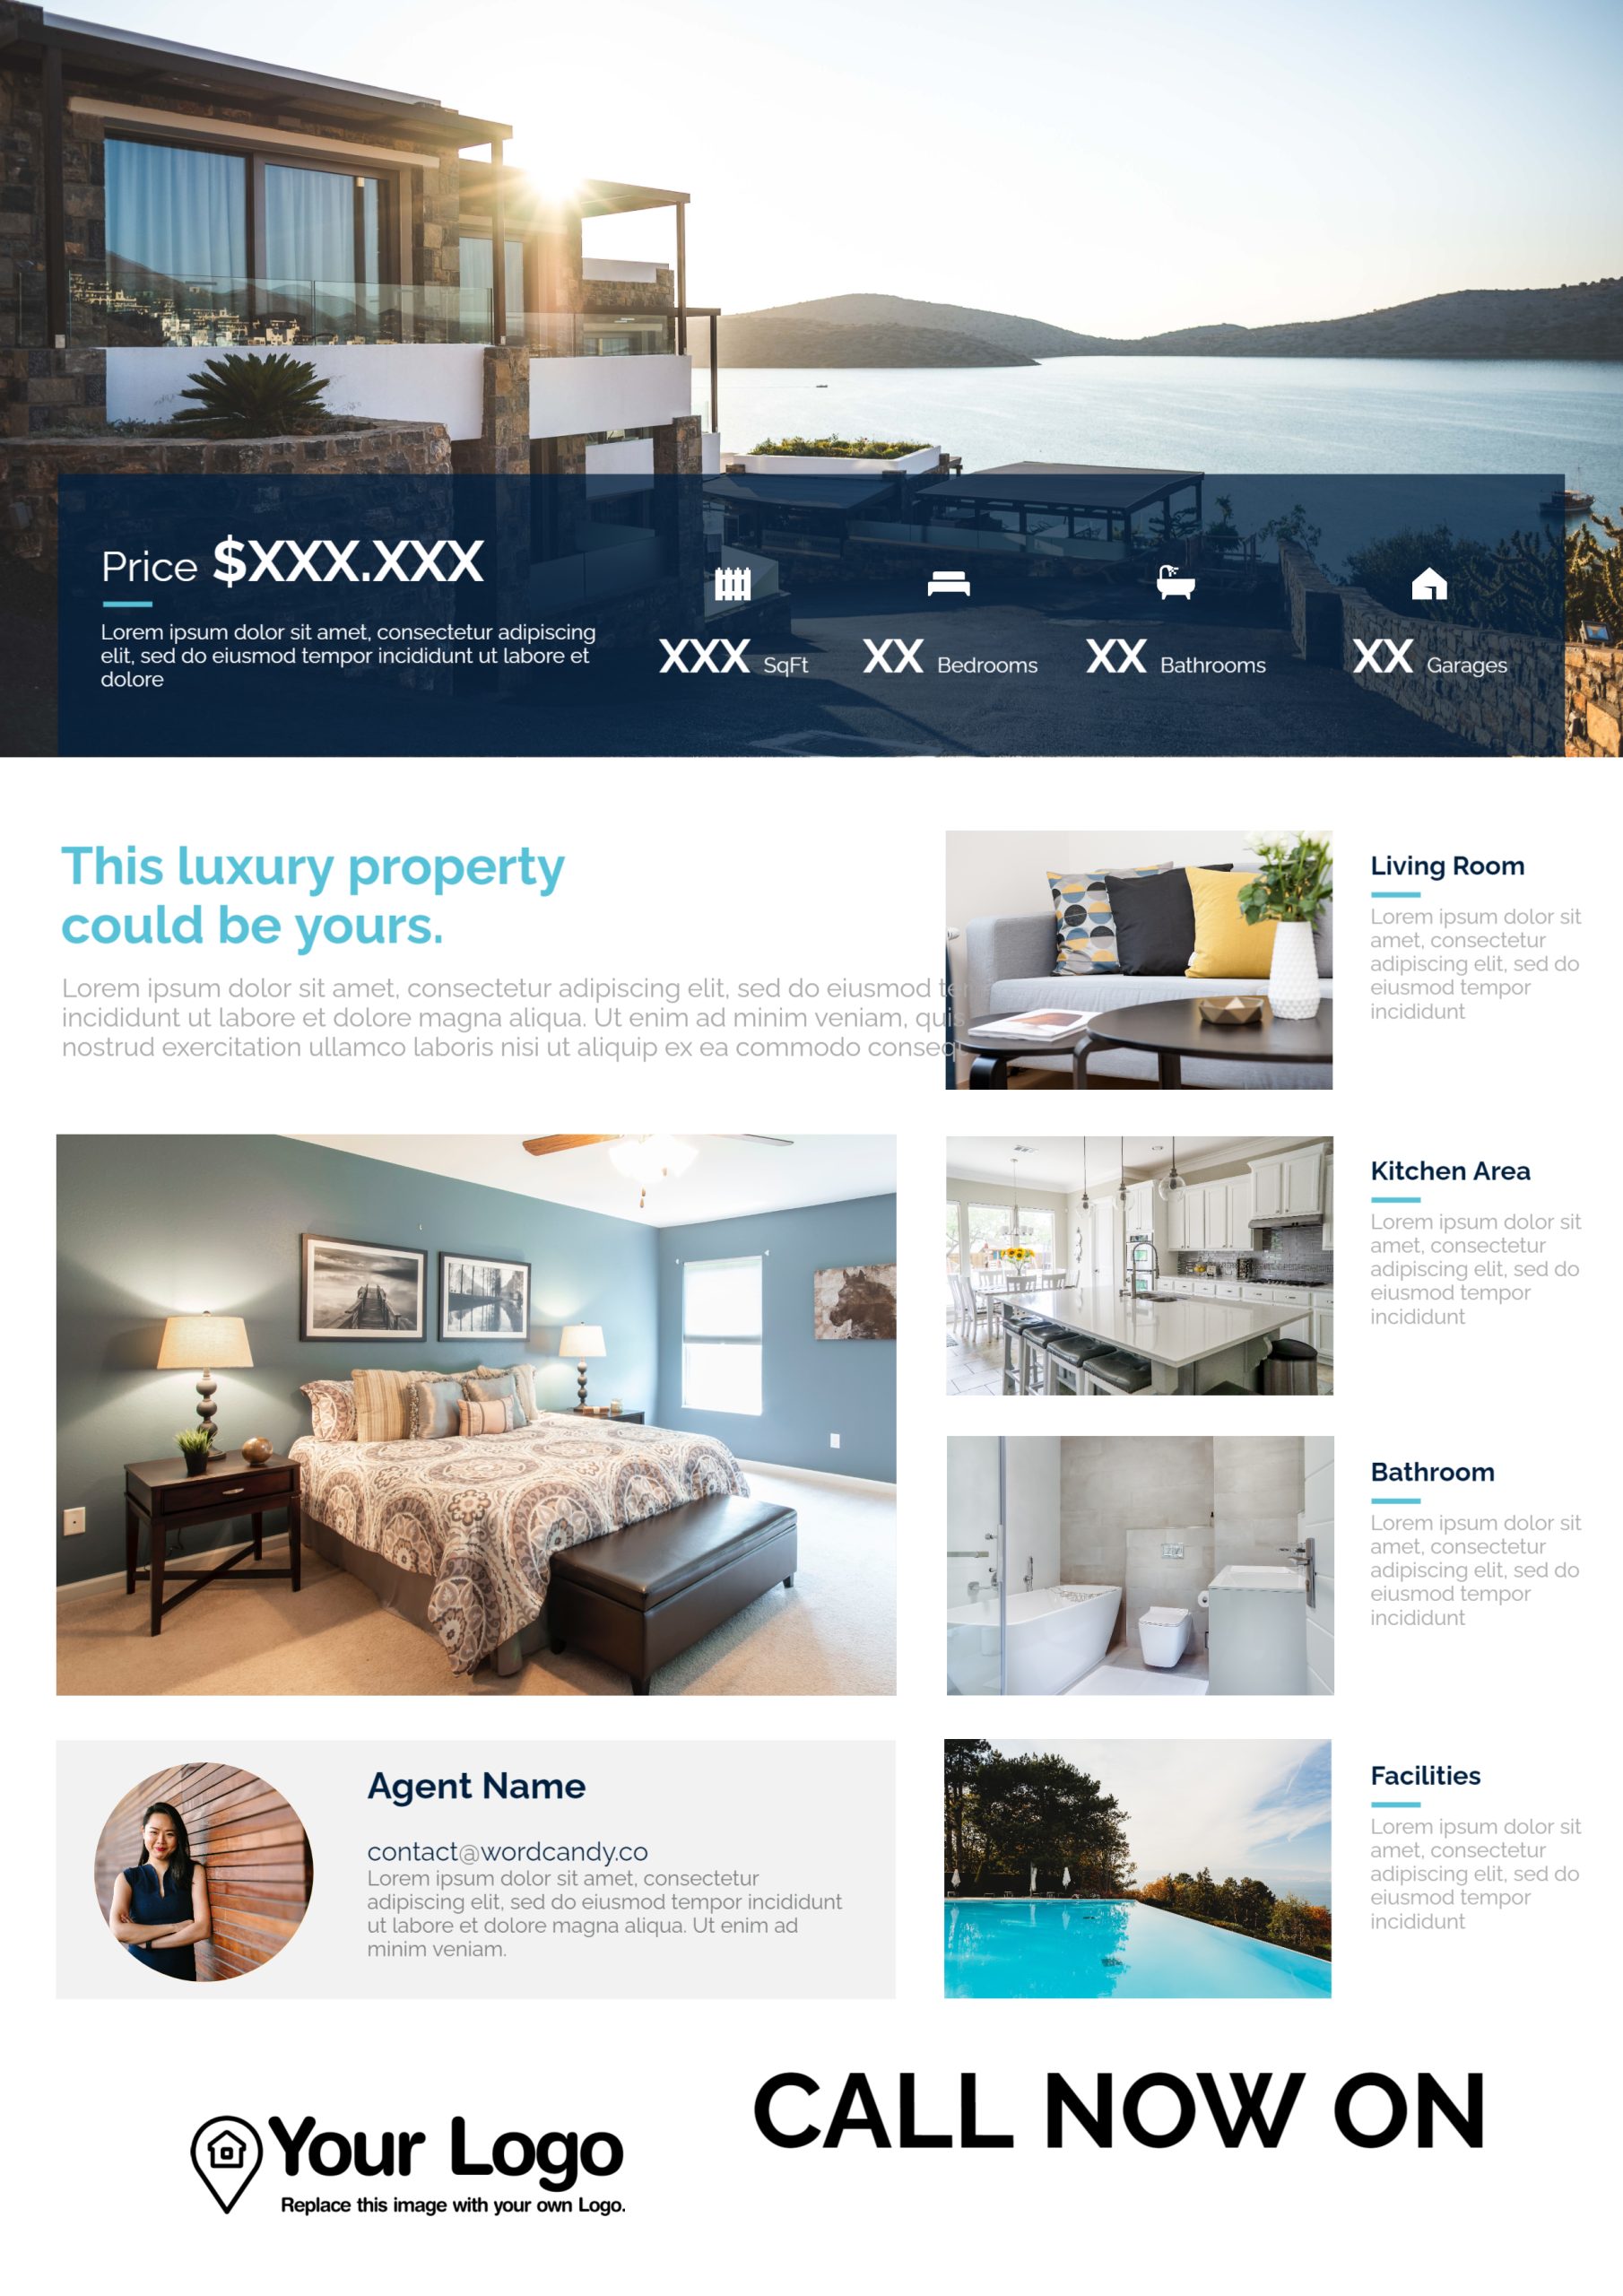 Just listed template by Jigglar to market luxury real estate properties.